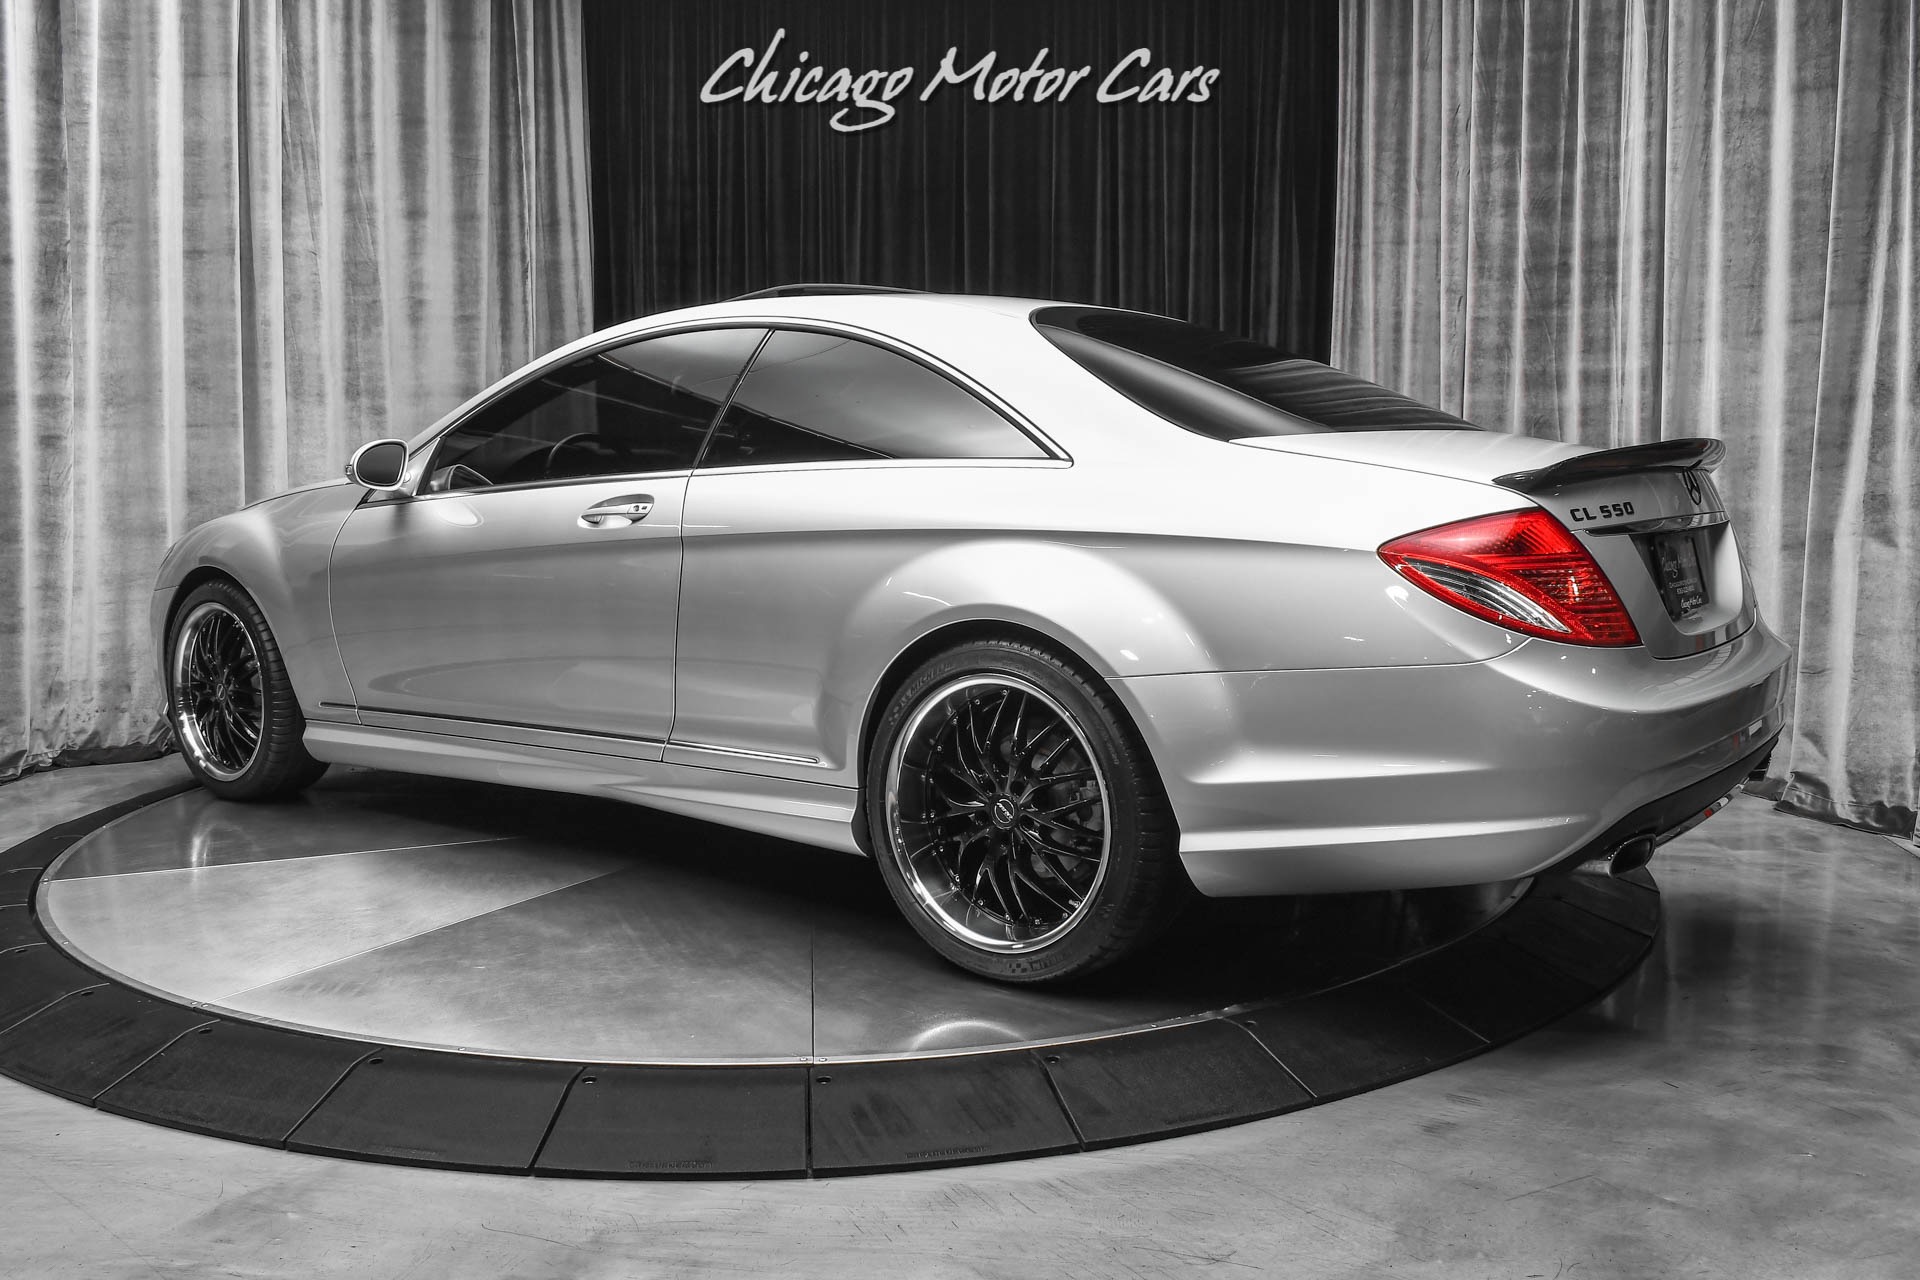 Used 2007 Mercedes-Benz CL-Class CL 550 Coupe AMG Sport Pkg! Premium 2 Pkg!  Distronic Plus! For Sale (Special Pricing) | Chicago Motor Cars Stock #19559